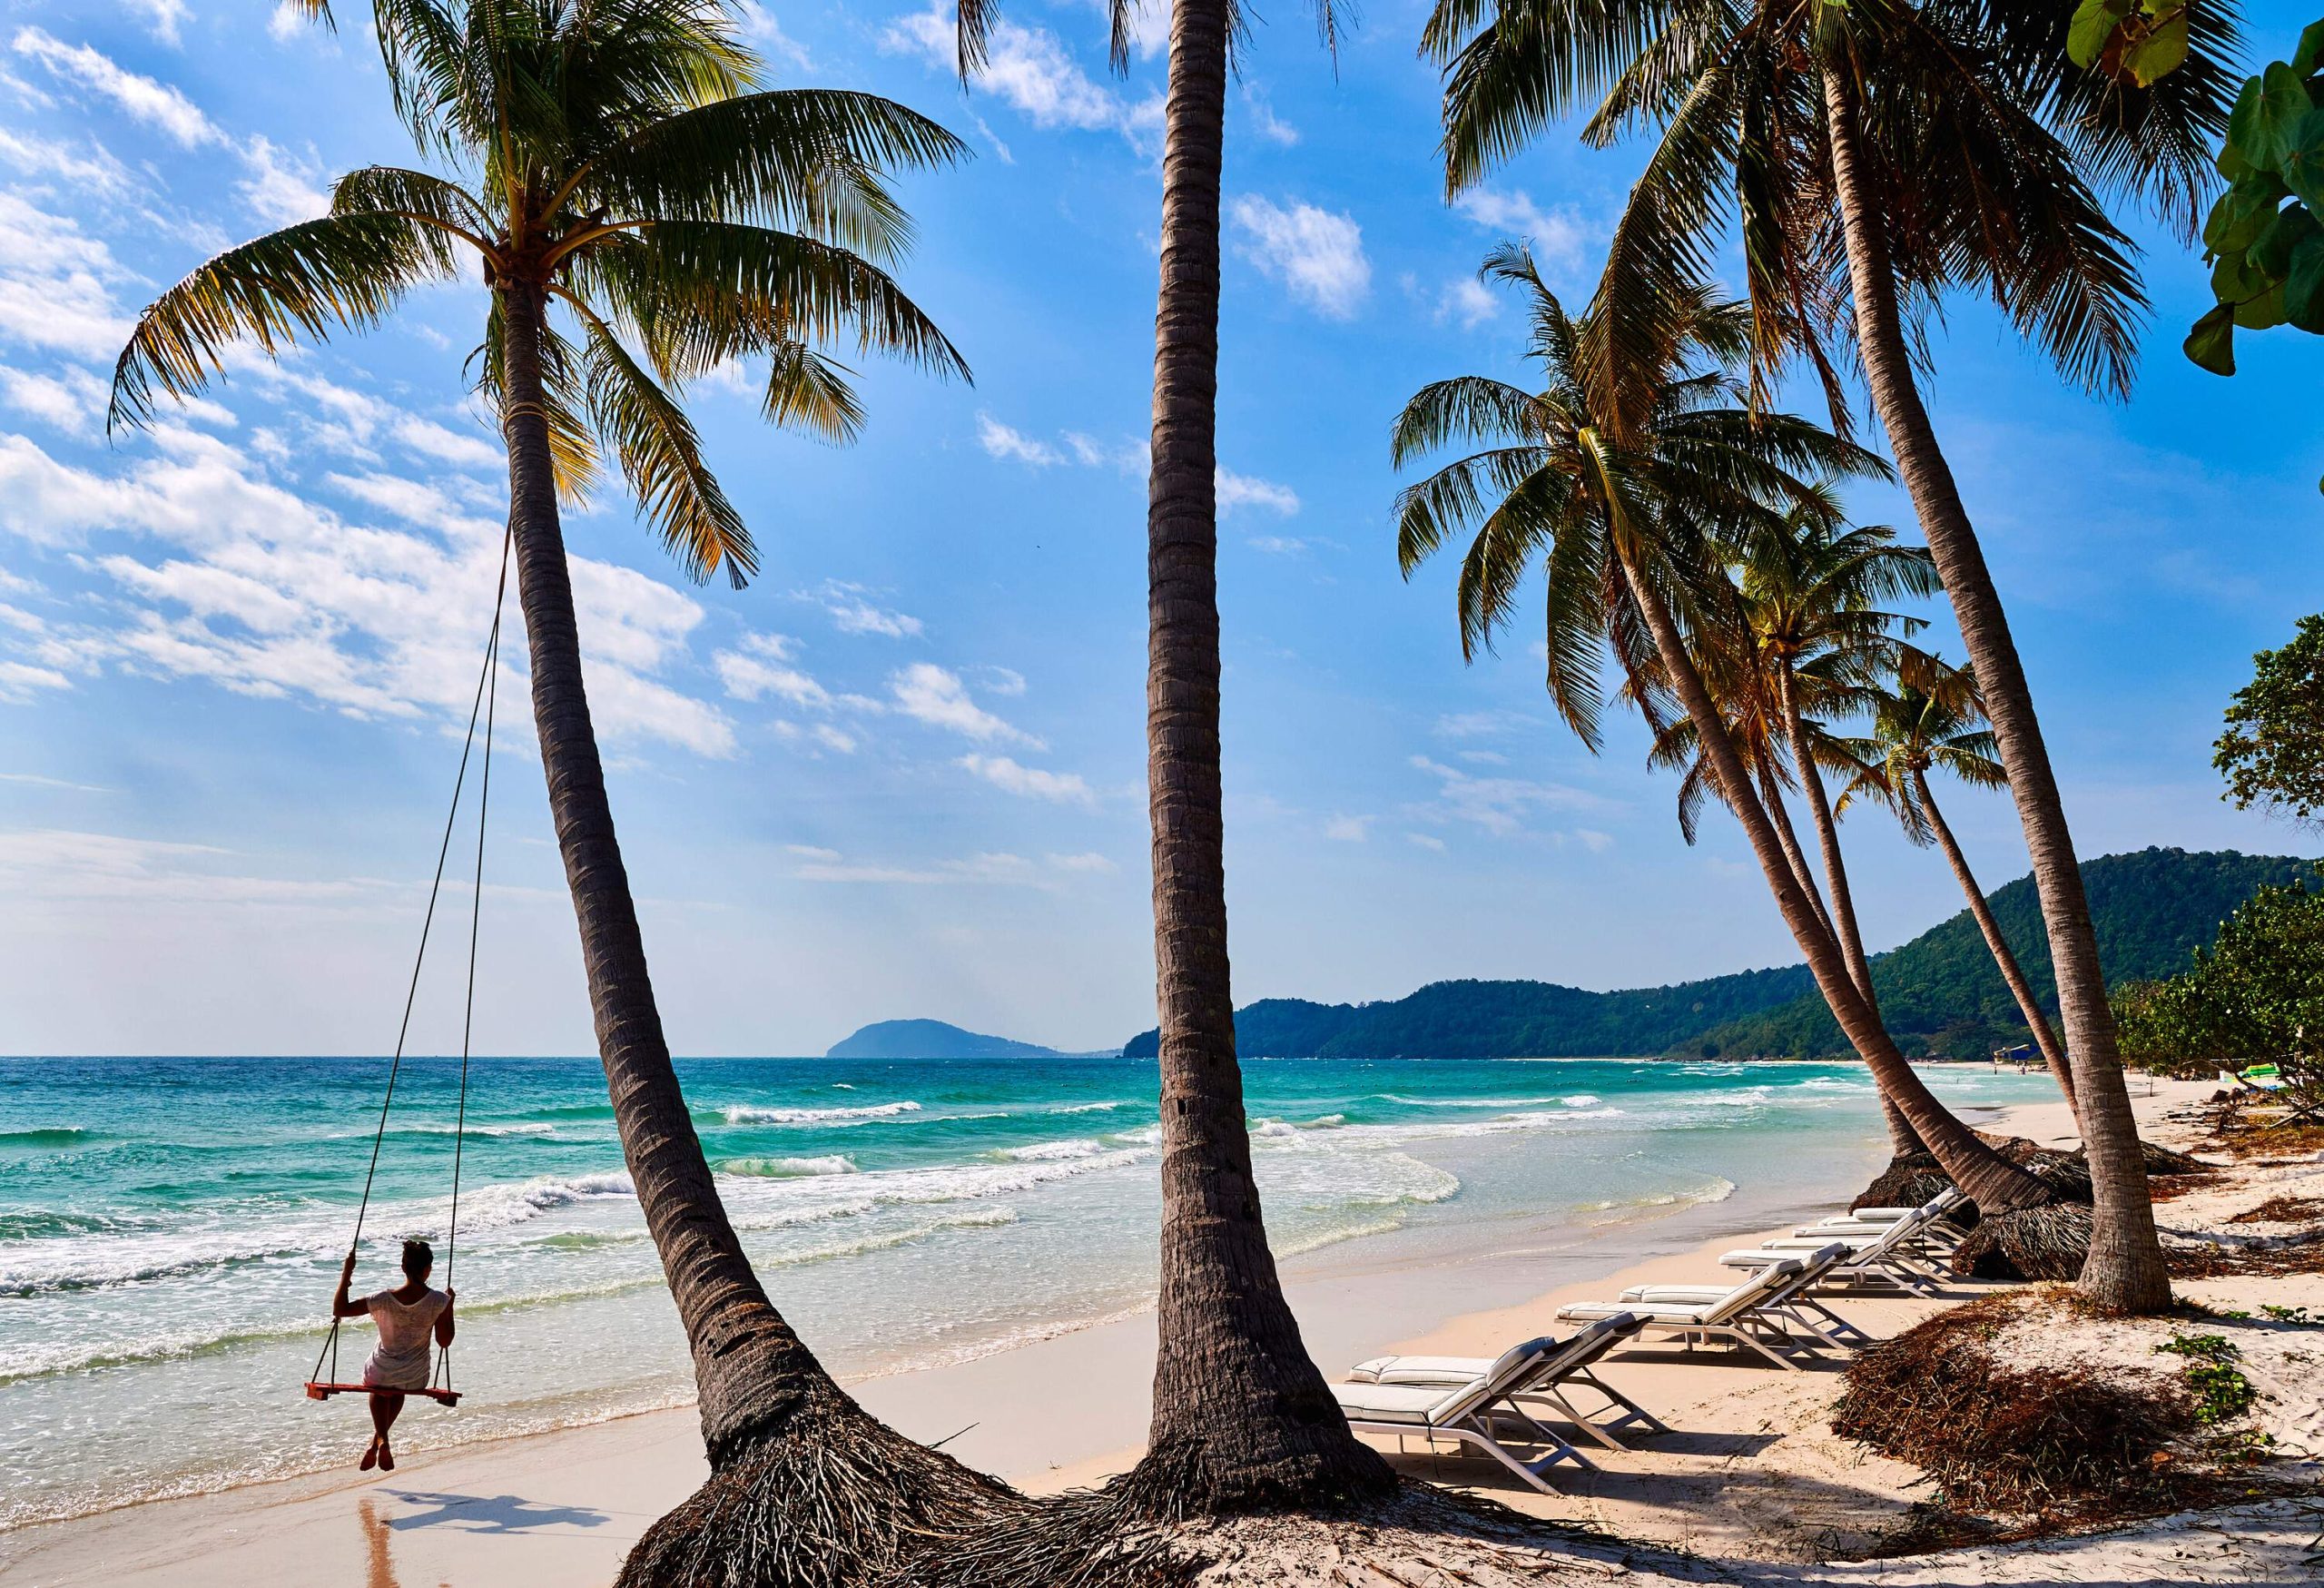 A tranquil beach features a person swinging on a swing tied to a palm tree, a line of palm trees swaying in the gentle breeze, and waves lapping onto the sandy shore.